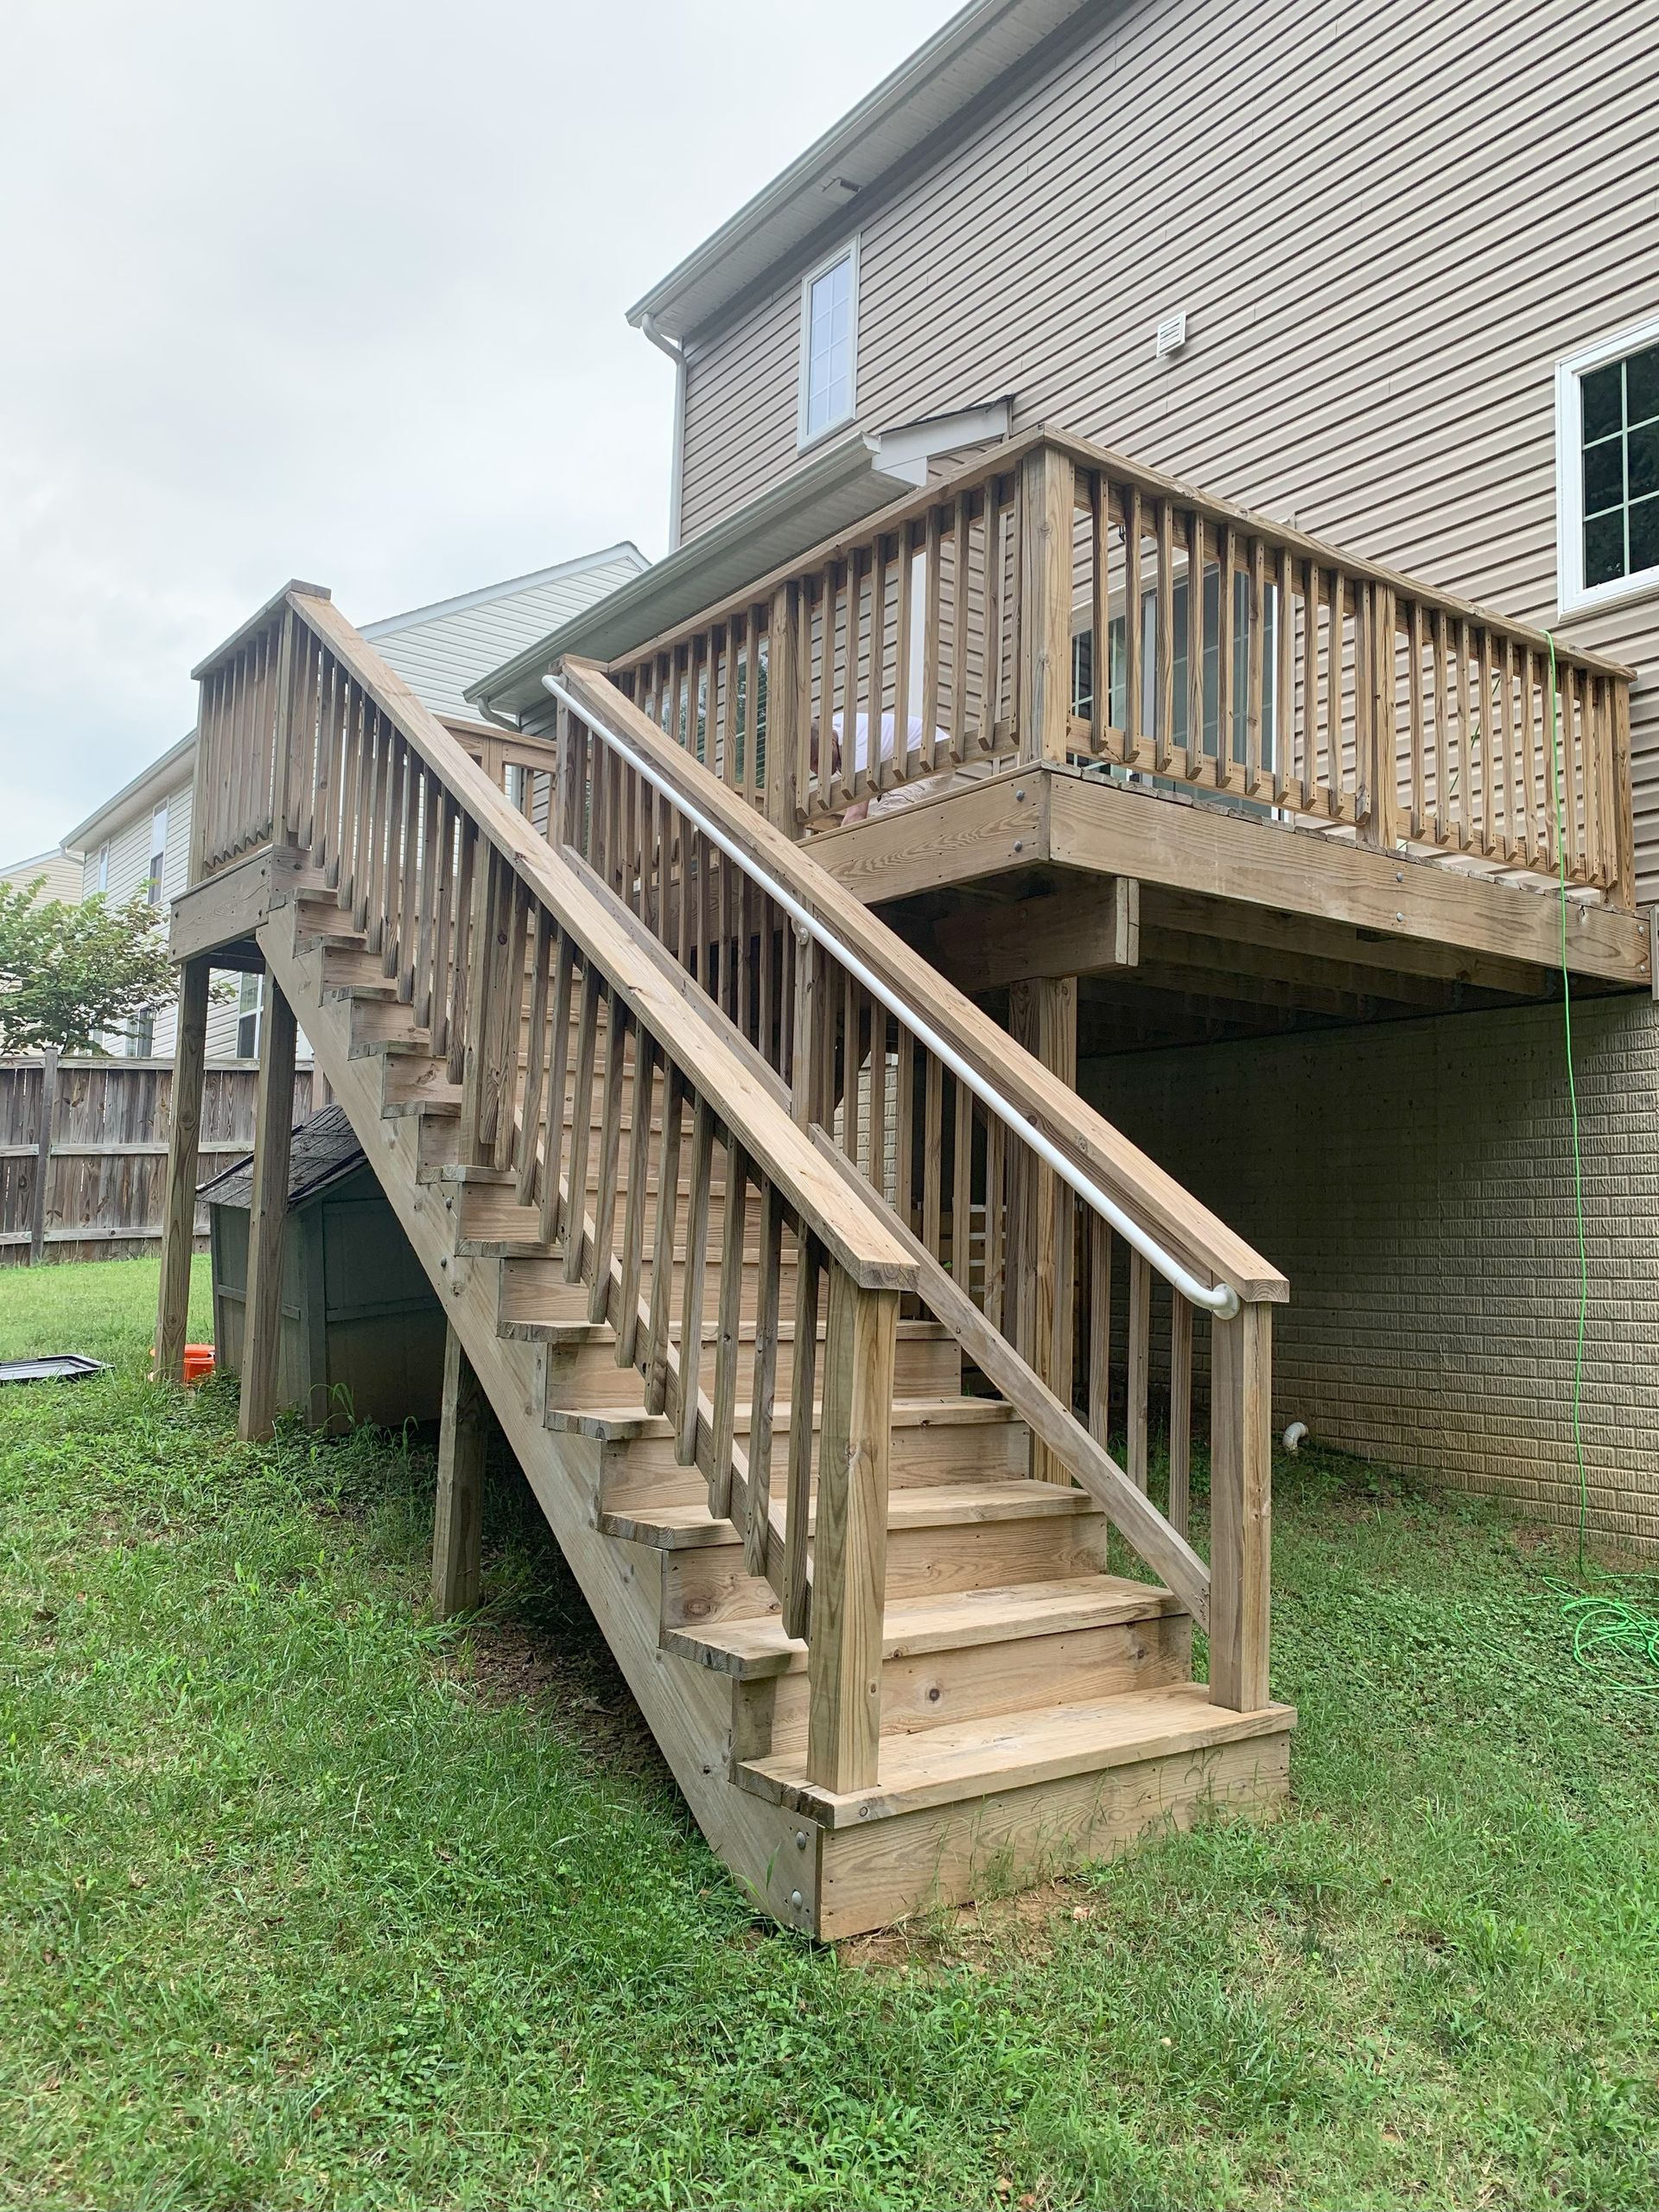 A wooden deck with stairs leading up to it is in the backyard of a house.